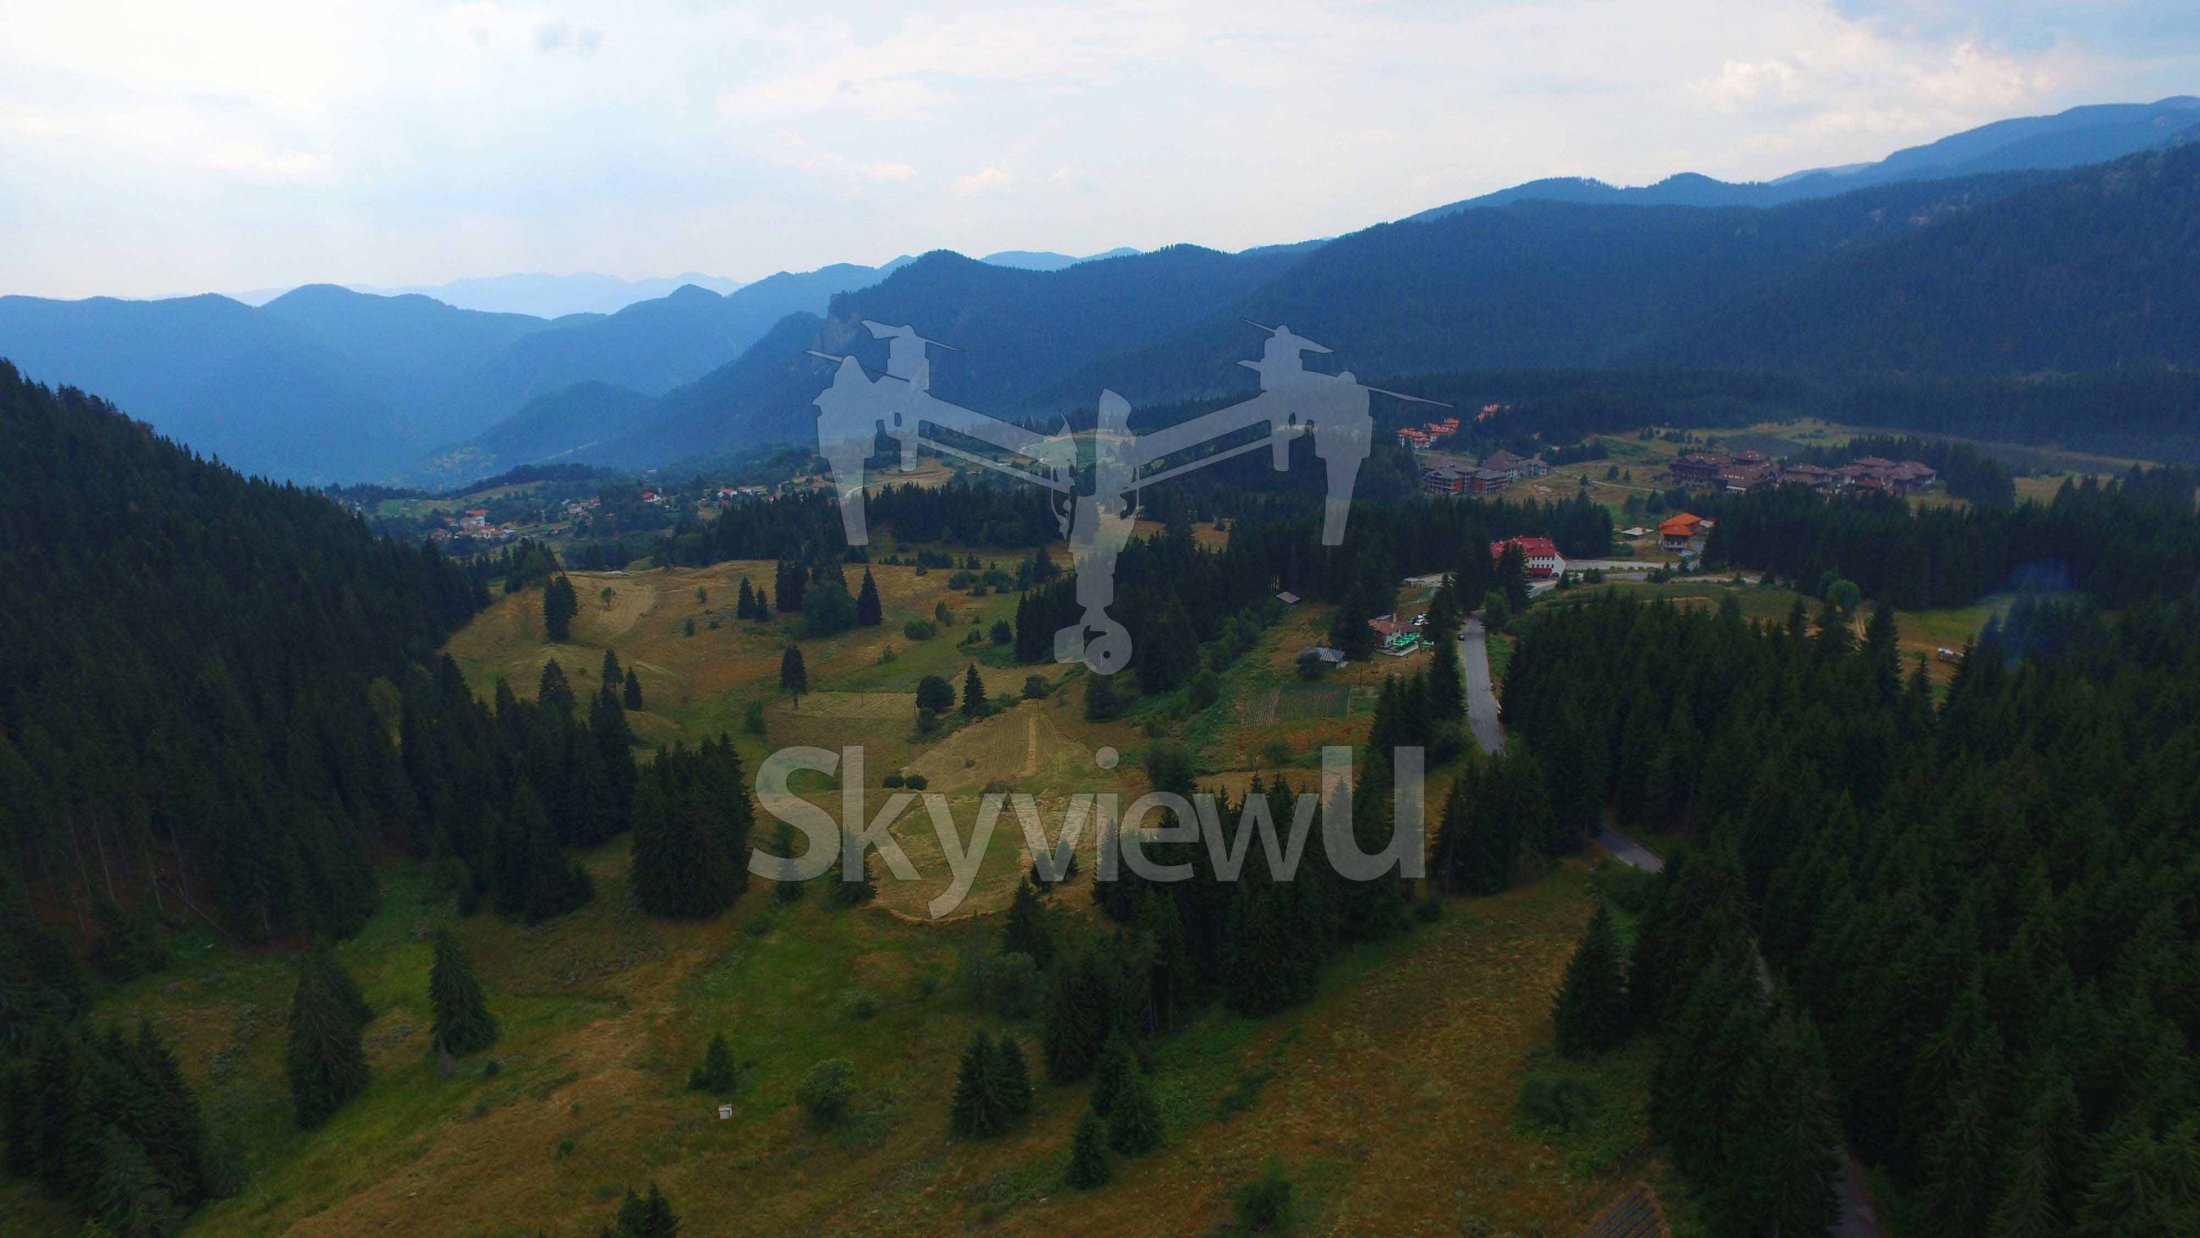 SkyviewU-Bulgaria-drone-photography-and-copter-aerial-video-with-DJI-Inspire-1-of-sightseeings-,-nature-,-historical-monuments-,-historical-places-,-landscapes-,-tourist-attractions-and-national-treasures13